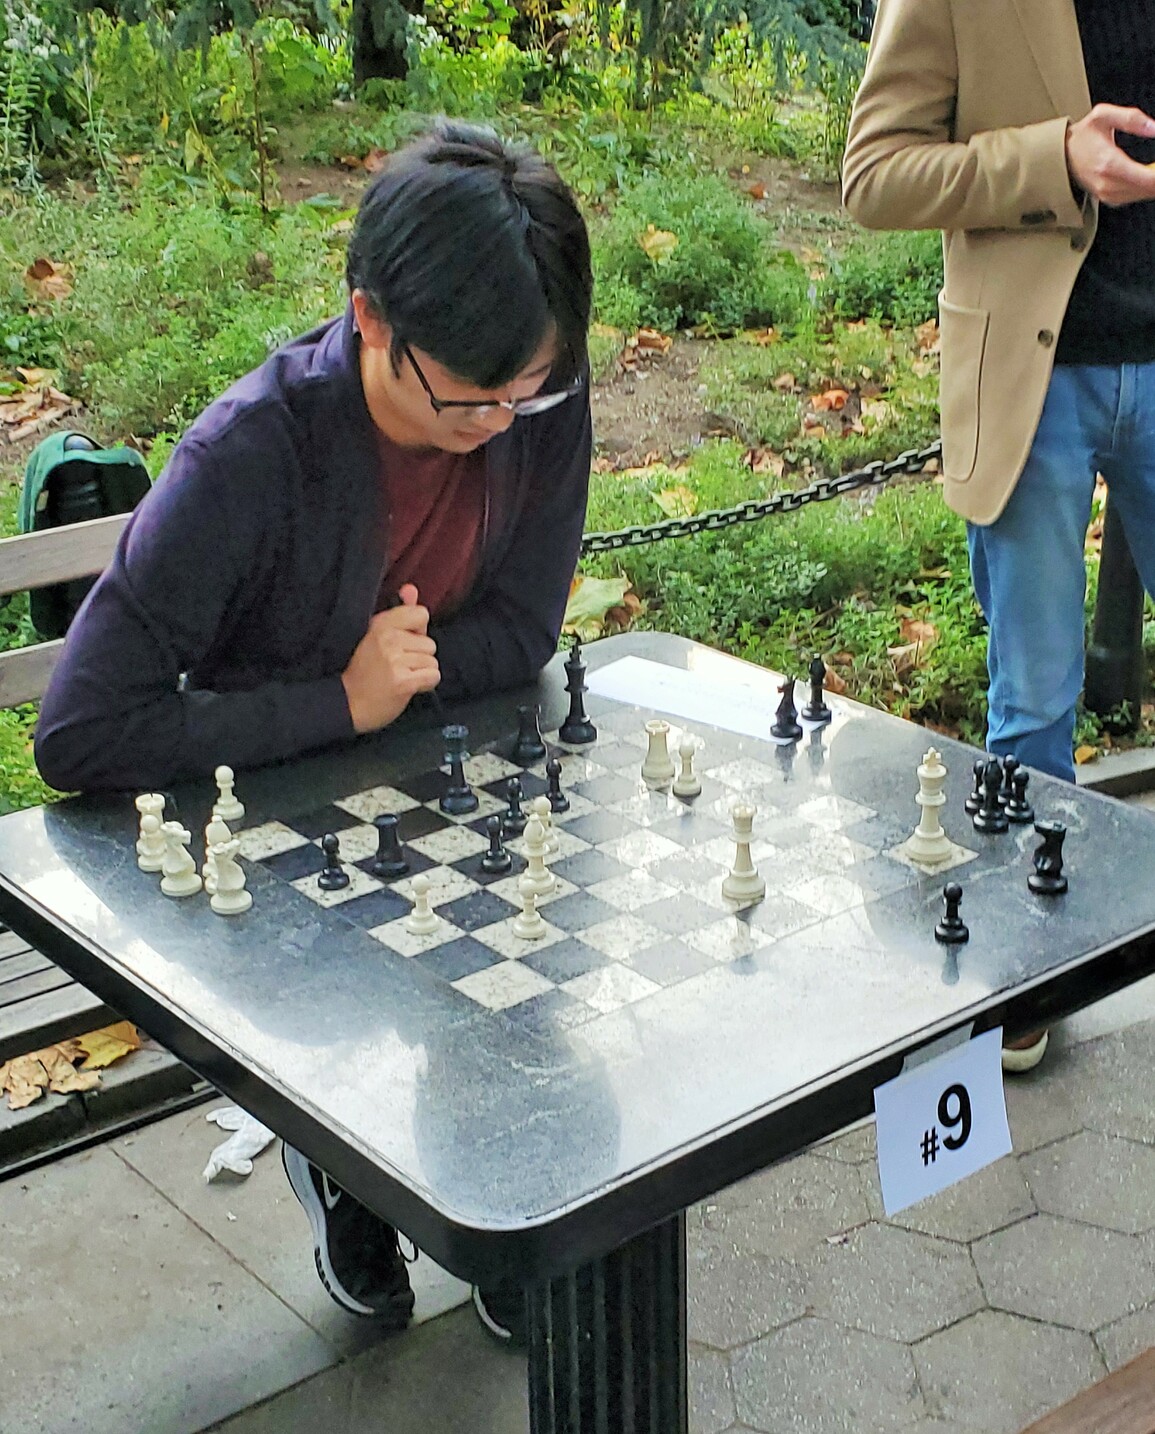 Nakamura plays 101 game simultaneous exhibition in Joburg: Only loses 2  games. Will sponsor two teams. : r/chess